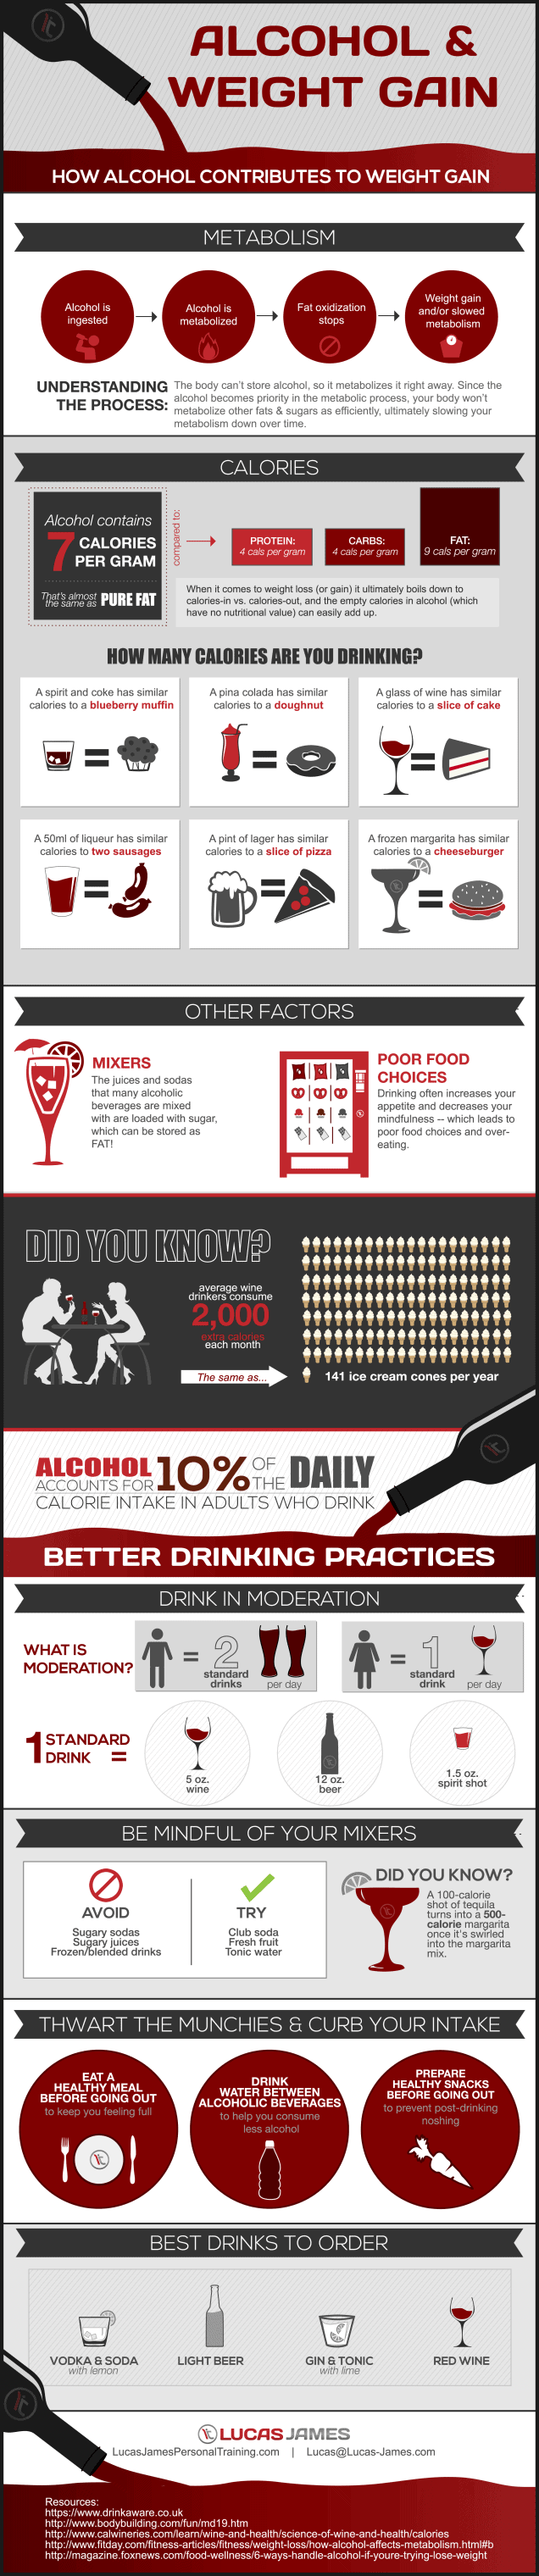 Alcohol and Weight Gain